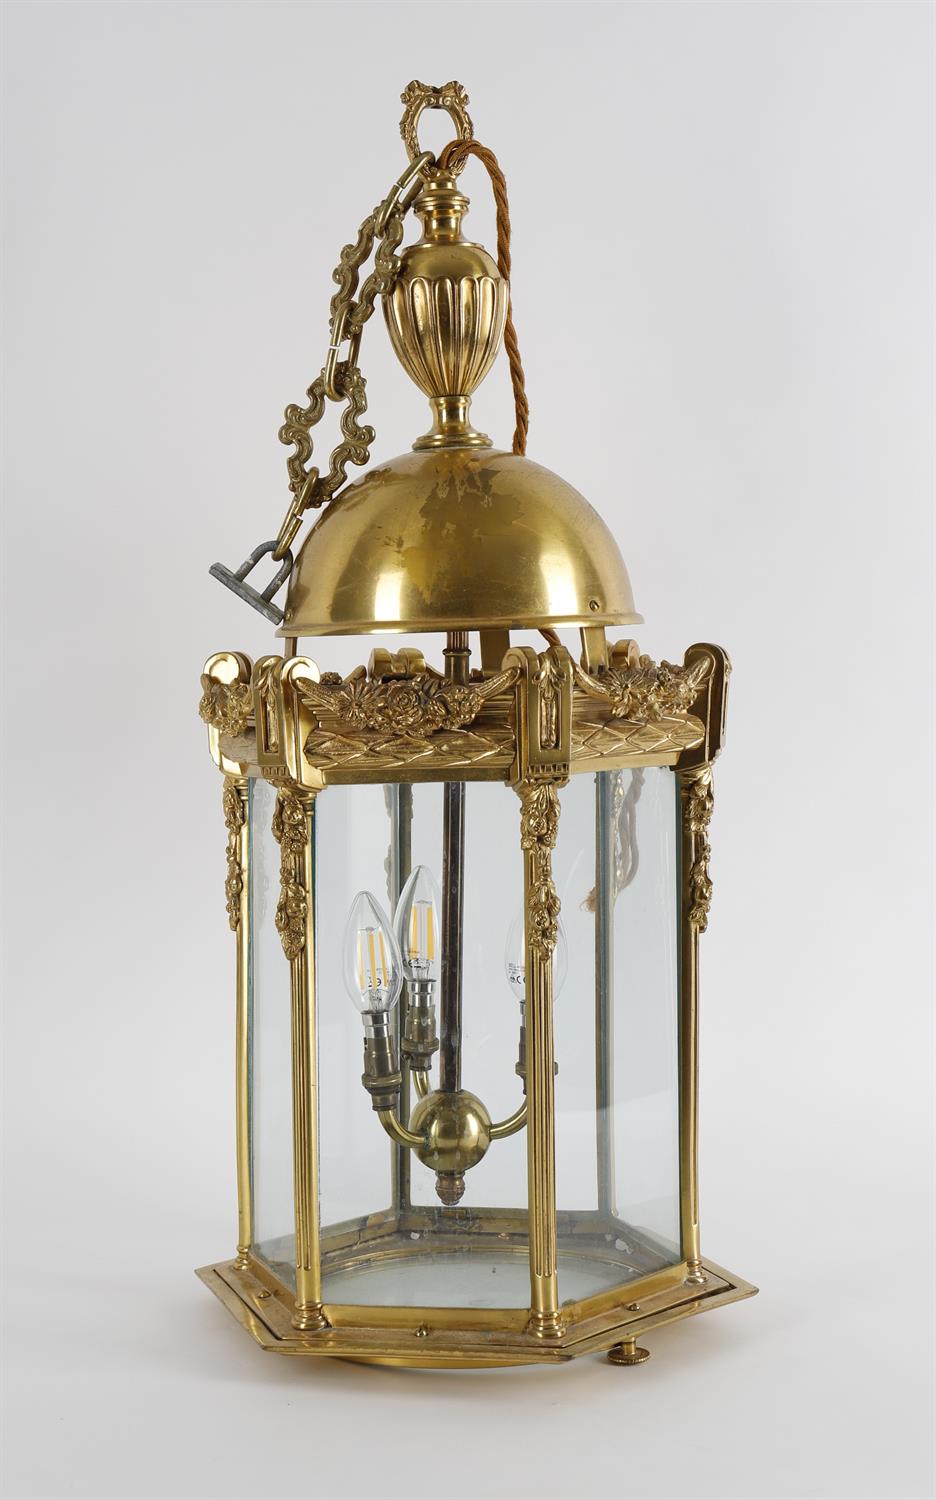 A gilt metal six glass hall lantern in the late 18th century French style - Image 2 of 4